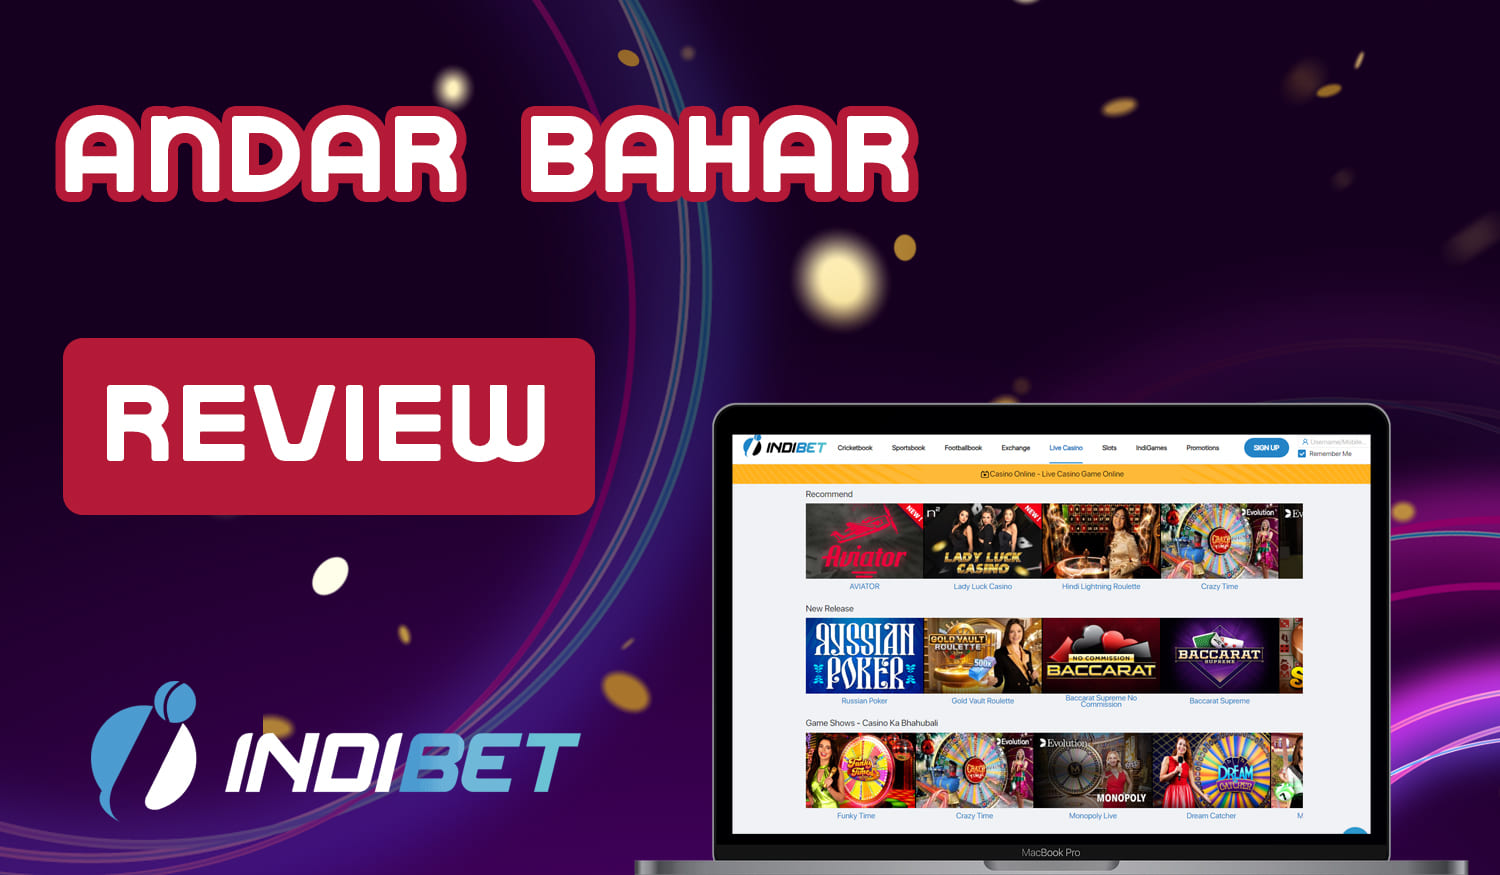 Andar Bahar game features, rules and offers from Indibet